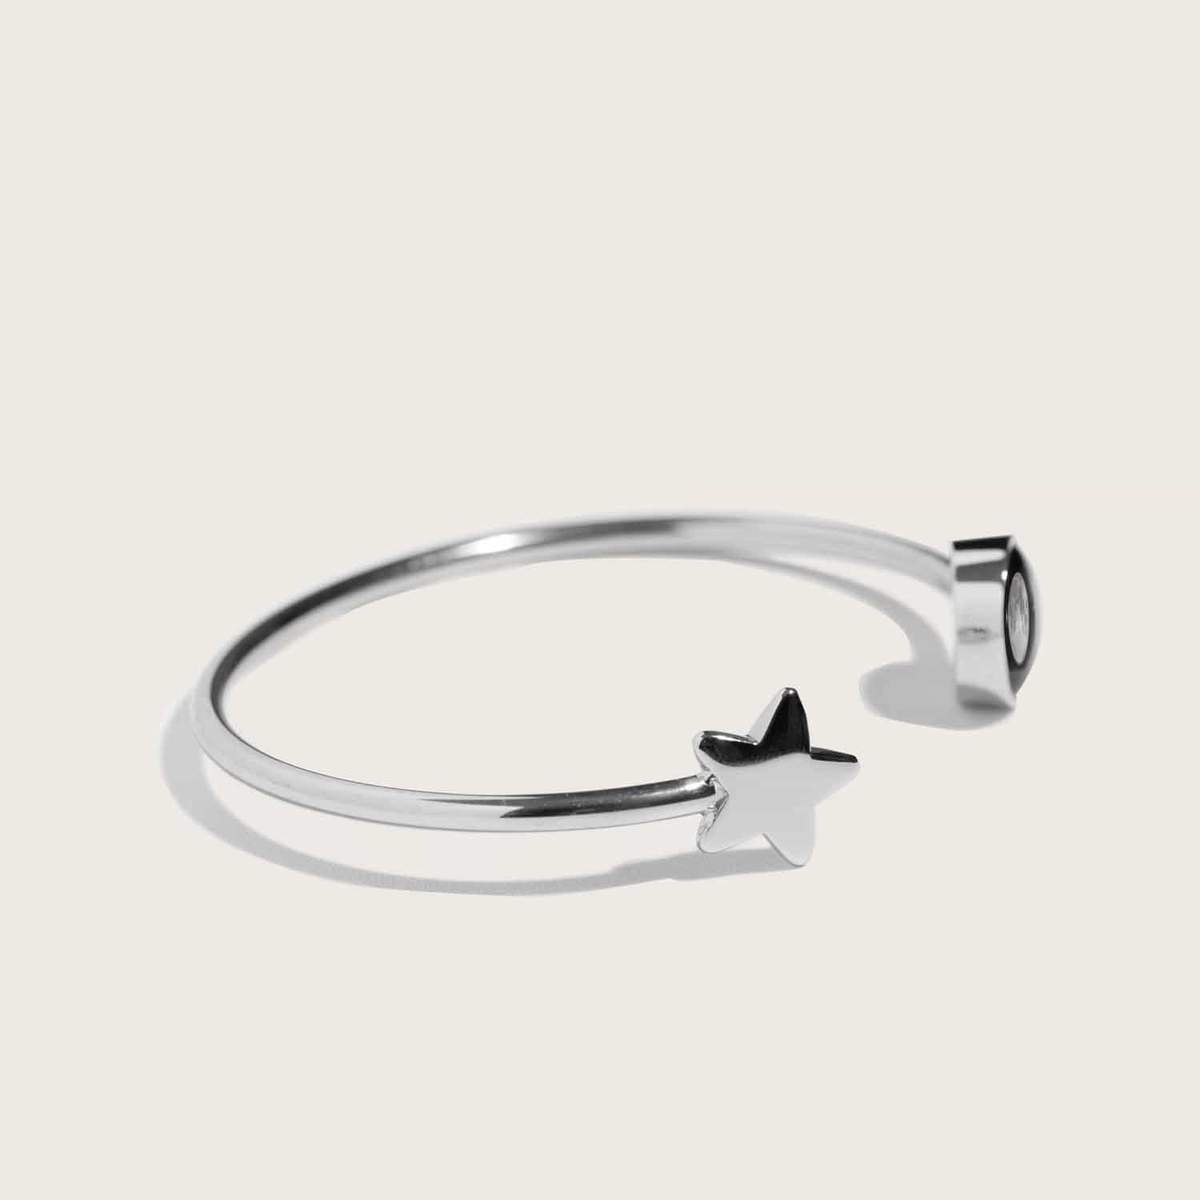 Crepuscule Cuff in Stainless Steel